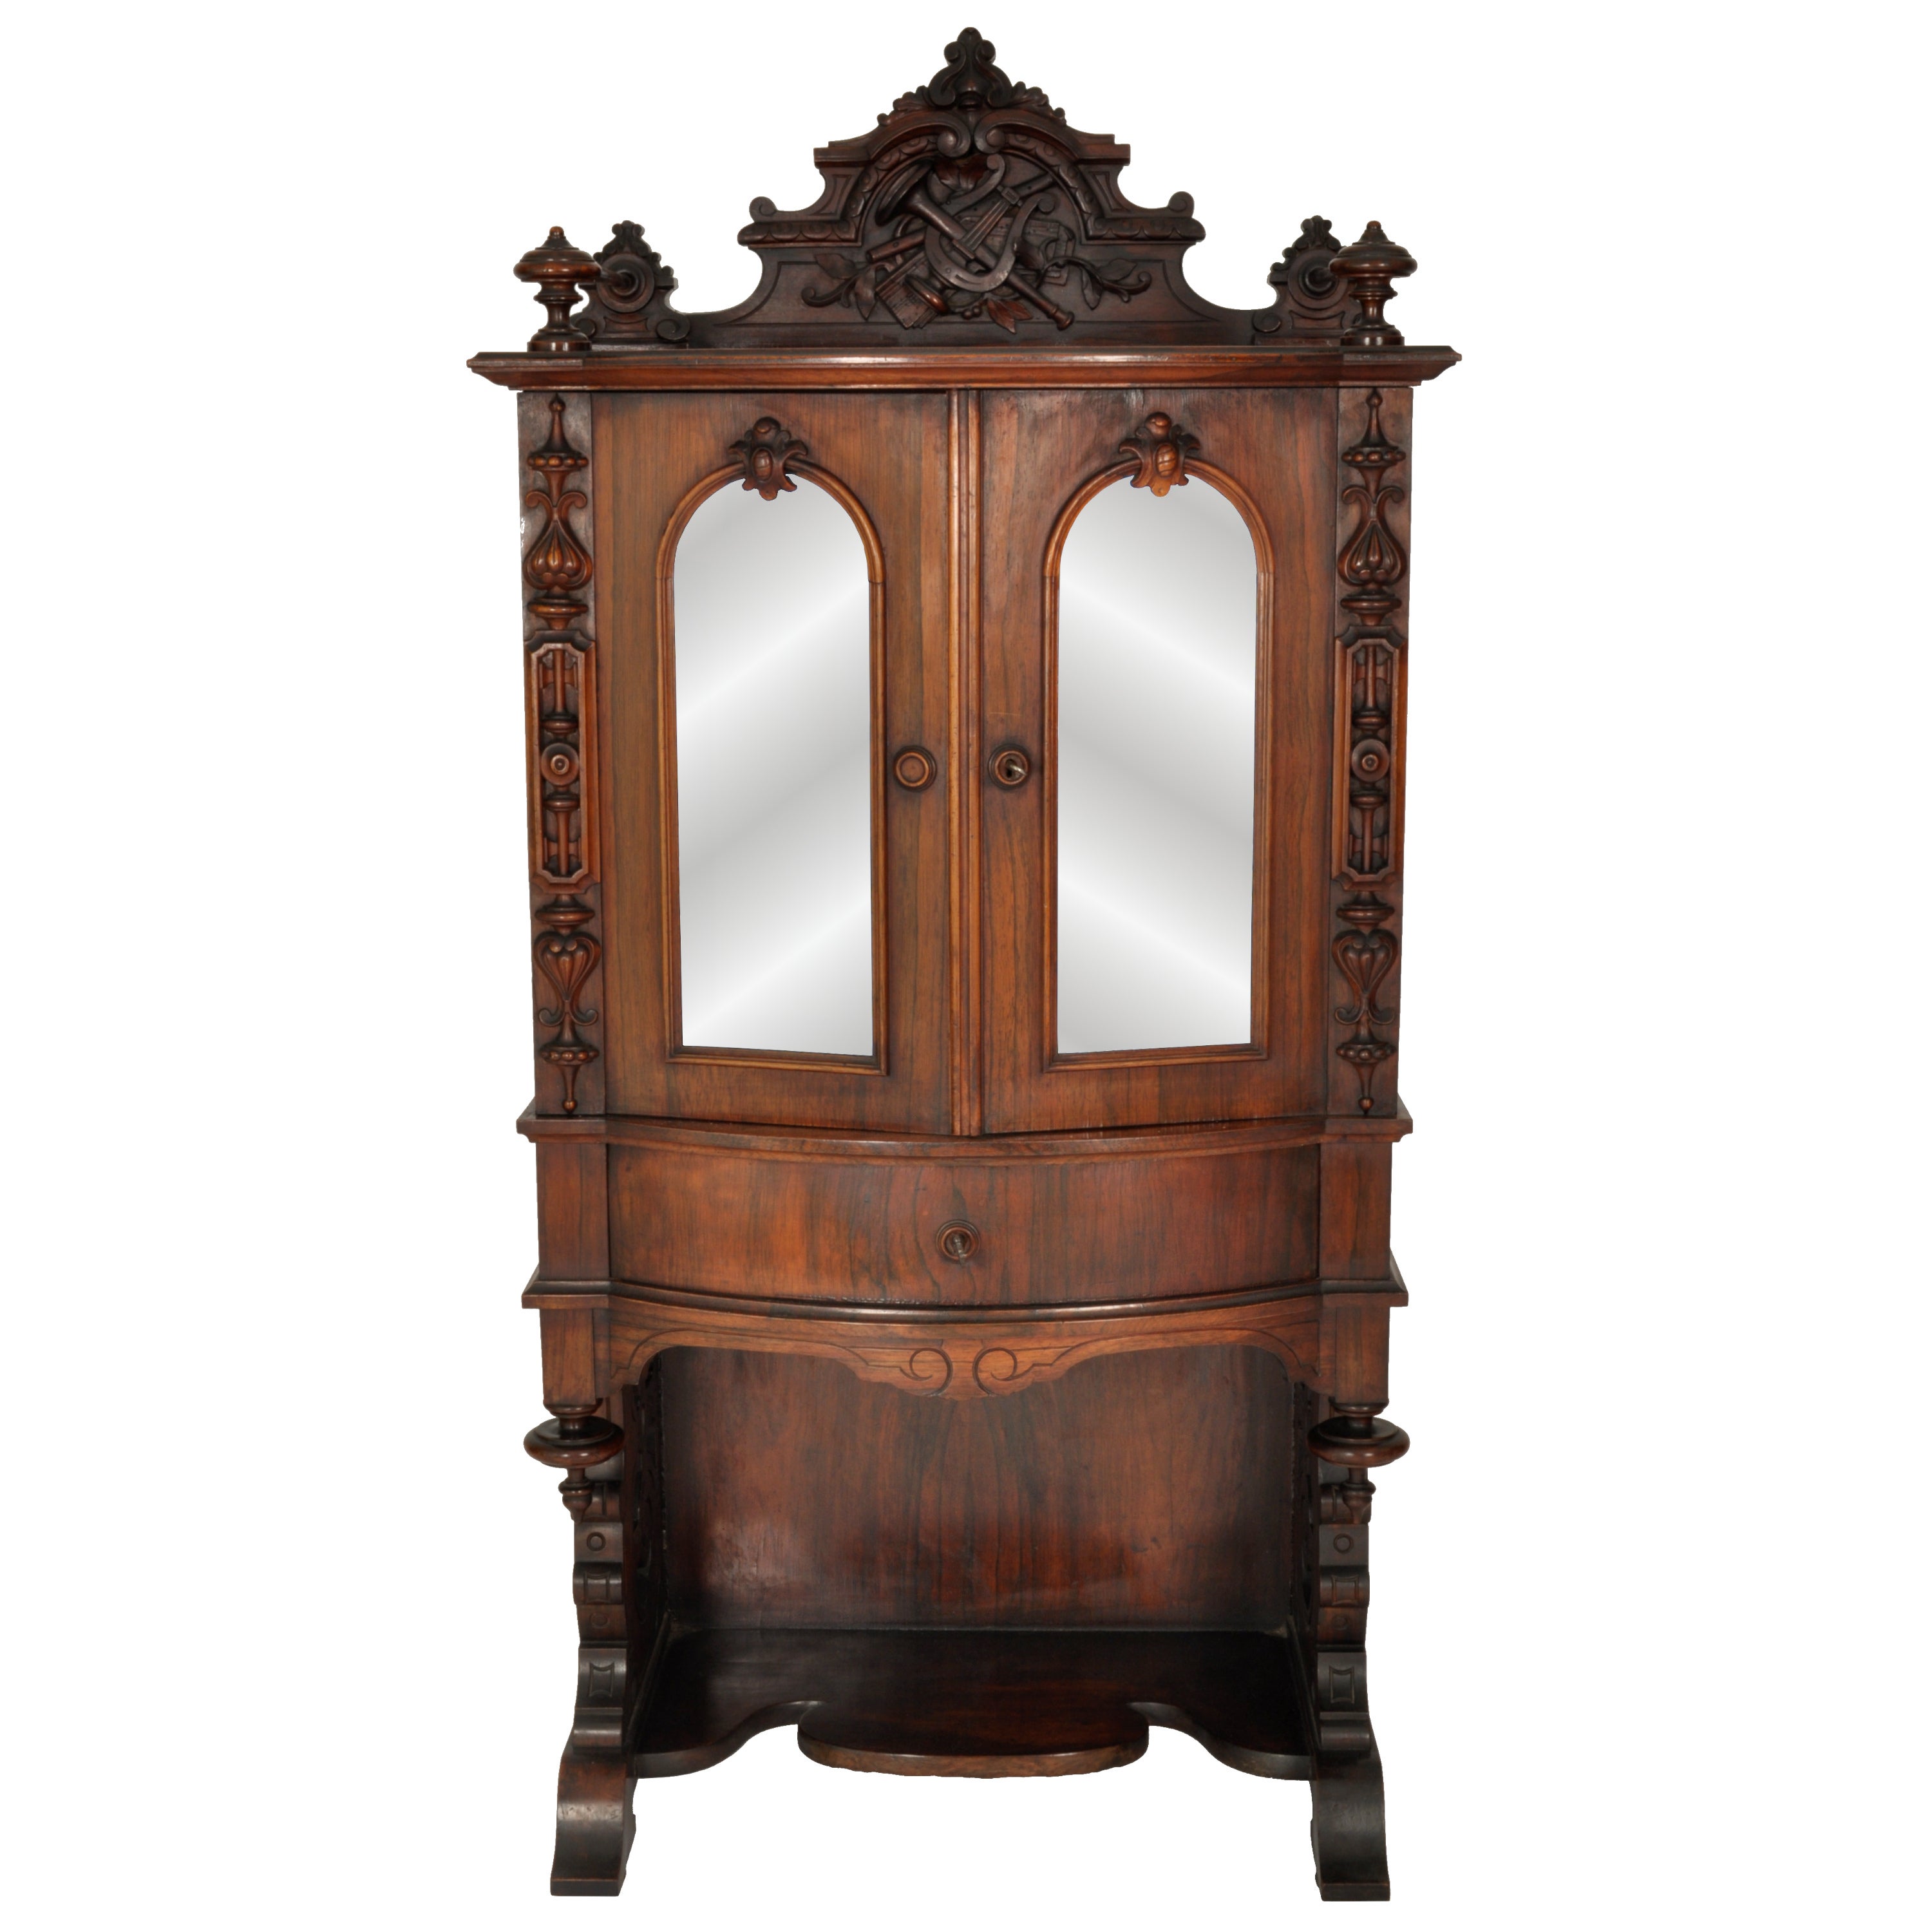 A fine antique American Renaissance Revival carved rosewood music cabinet, Circa 1870.
The top of the cabinet having a finely handcarved backcrest, carved with musical instruments and joined with a gallery stretcher to a pair of turned finials.